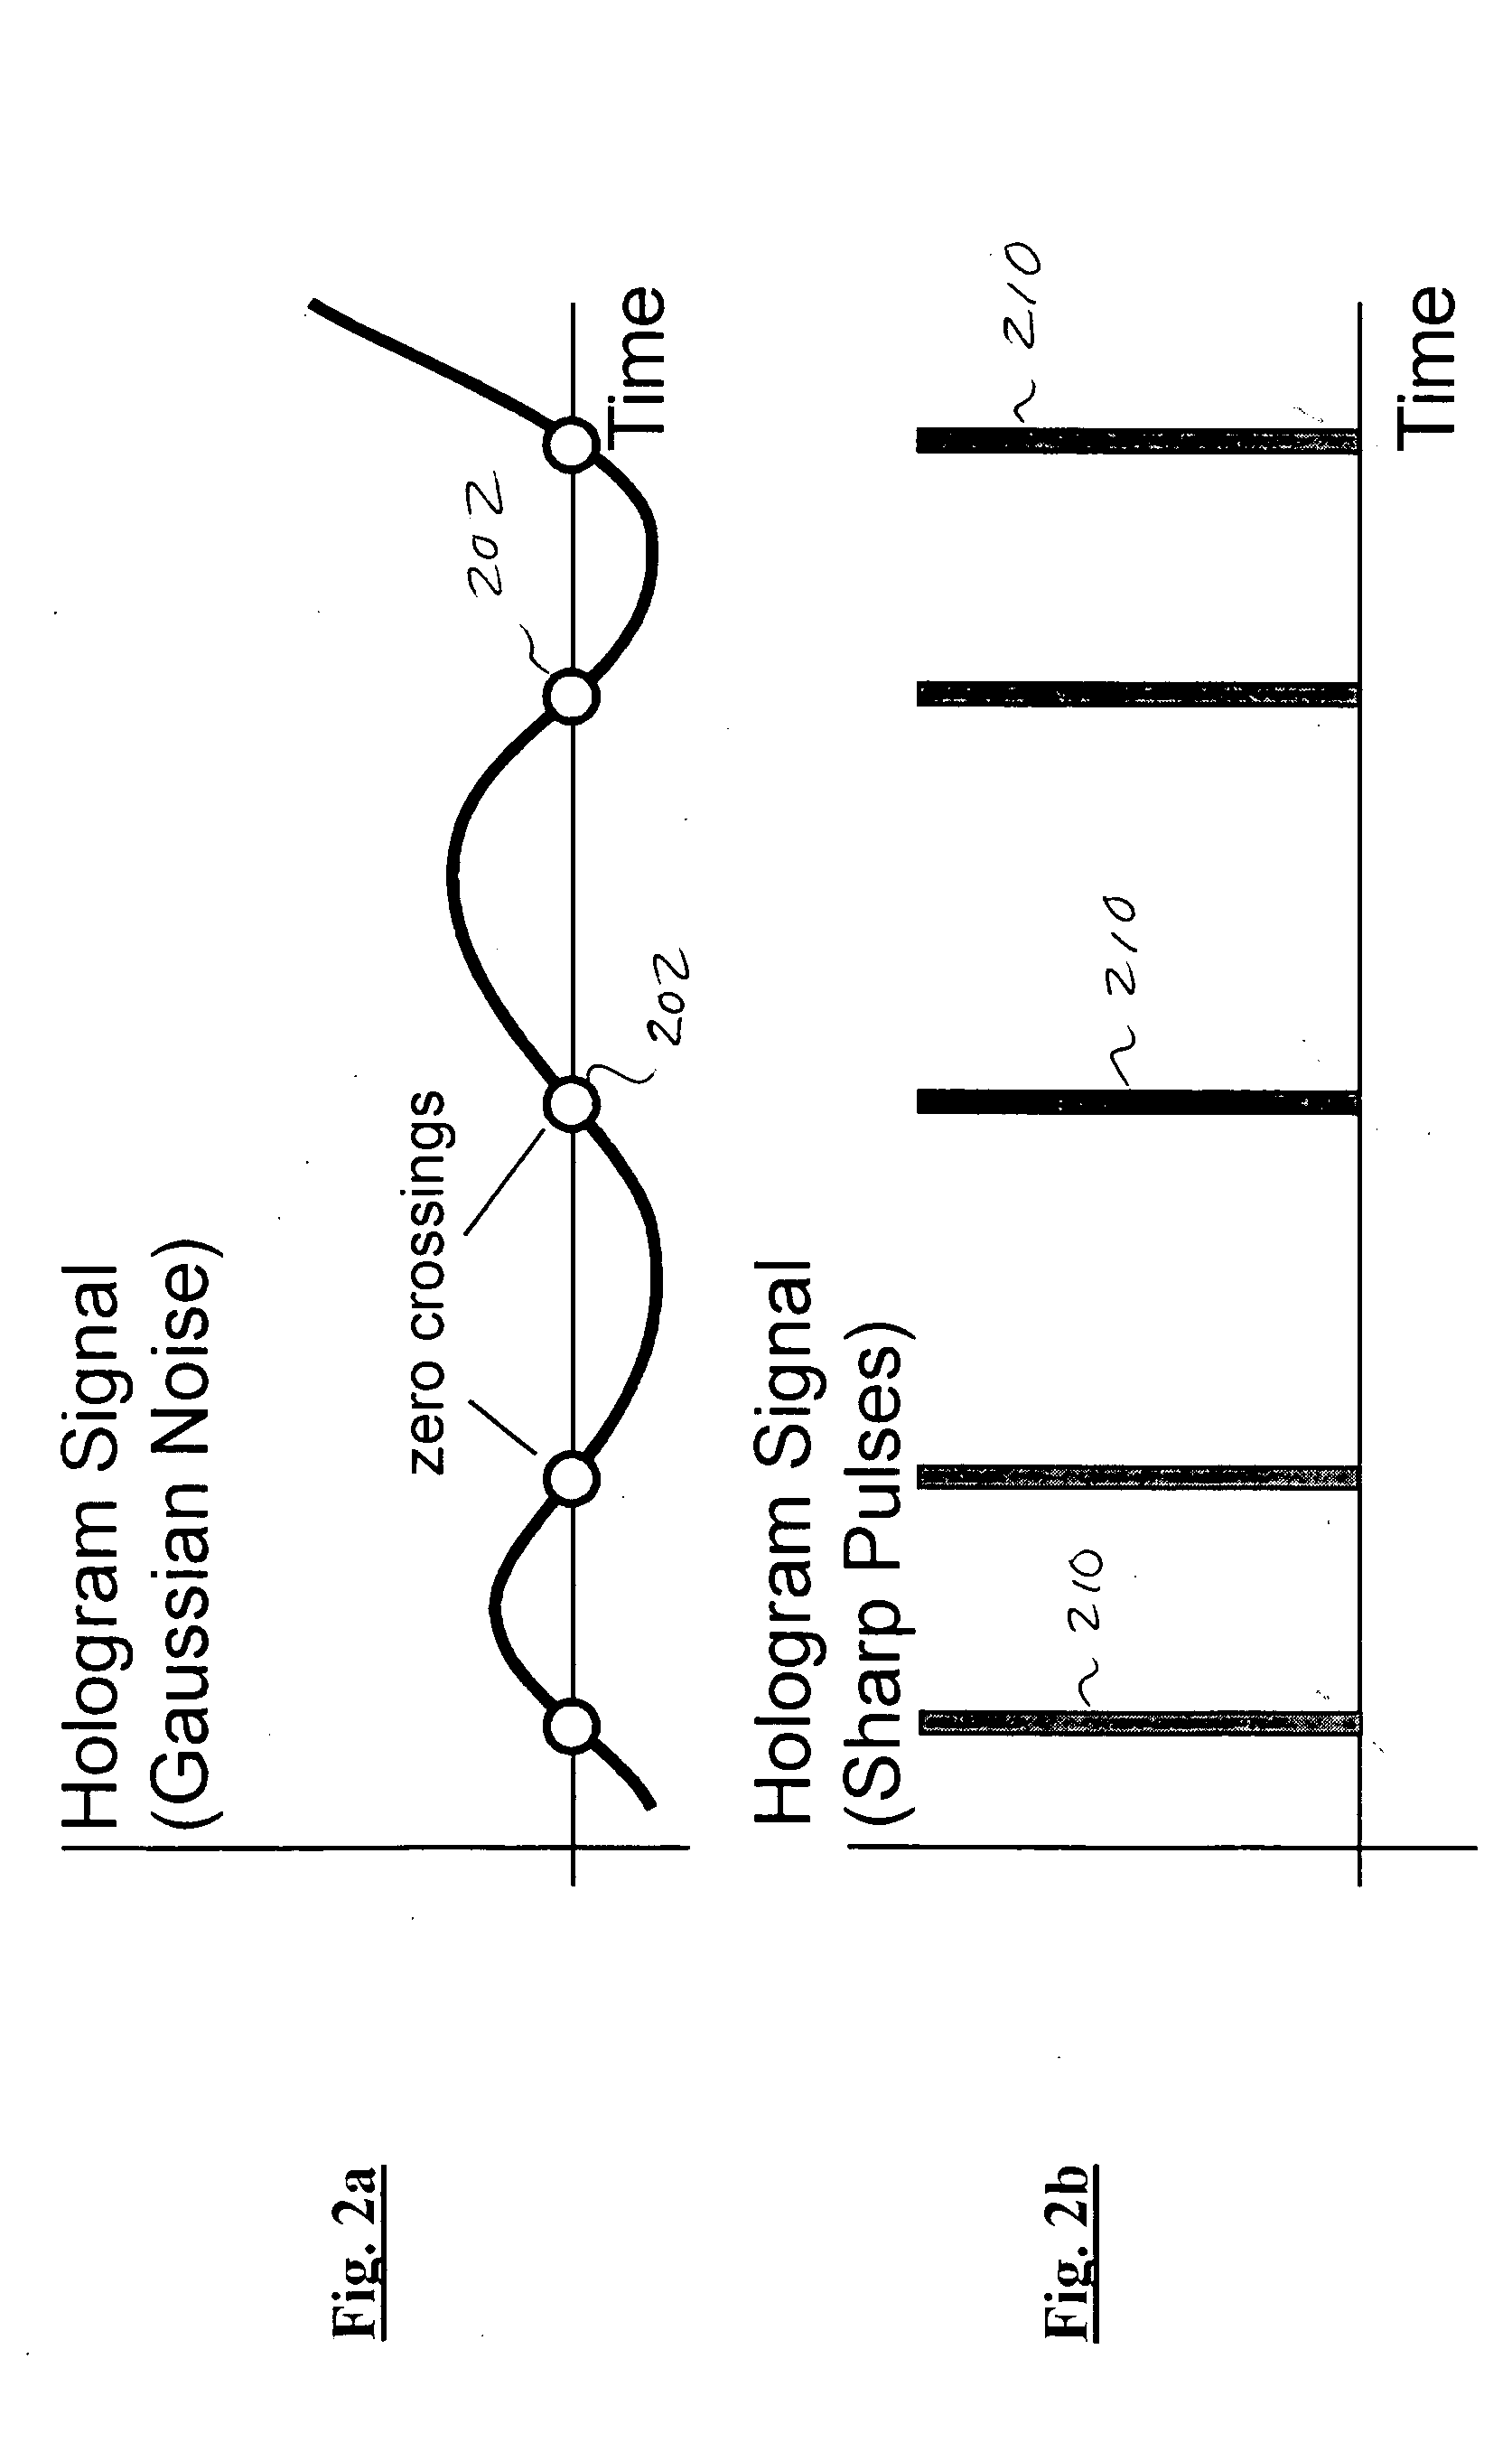 Frequency-hopped holographic communications apparatus and methods